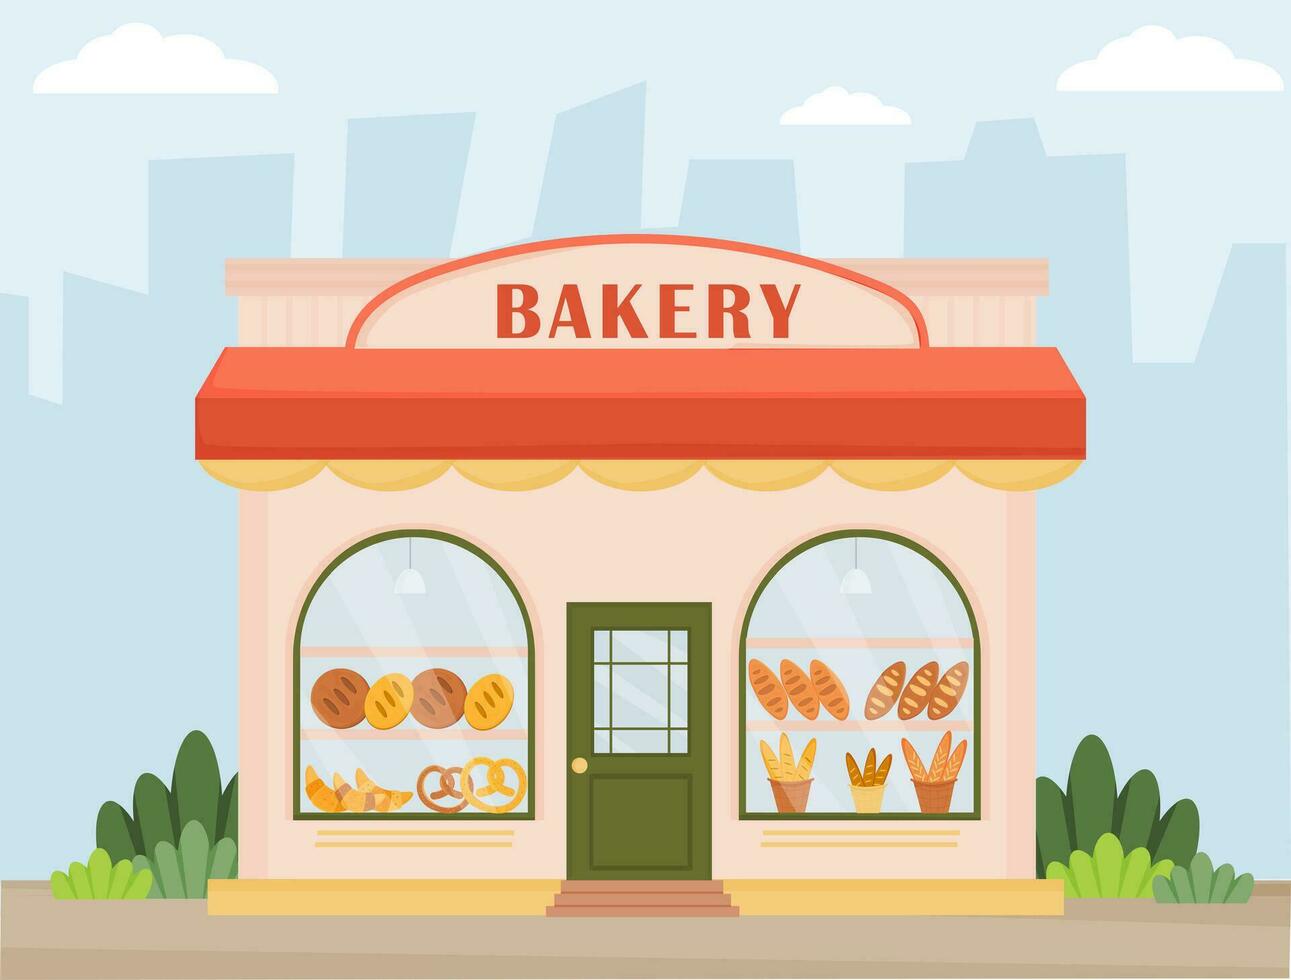 Bakery shop. Facade of a boulangerie. Bakery shop building facade on the street. Baking store, cafe, bread, pastry shop. Showcases with bread, bagel, baguette. Flat vector illustration.